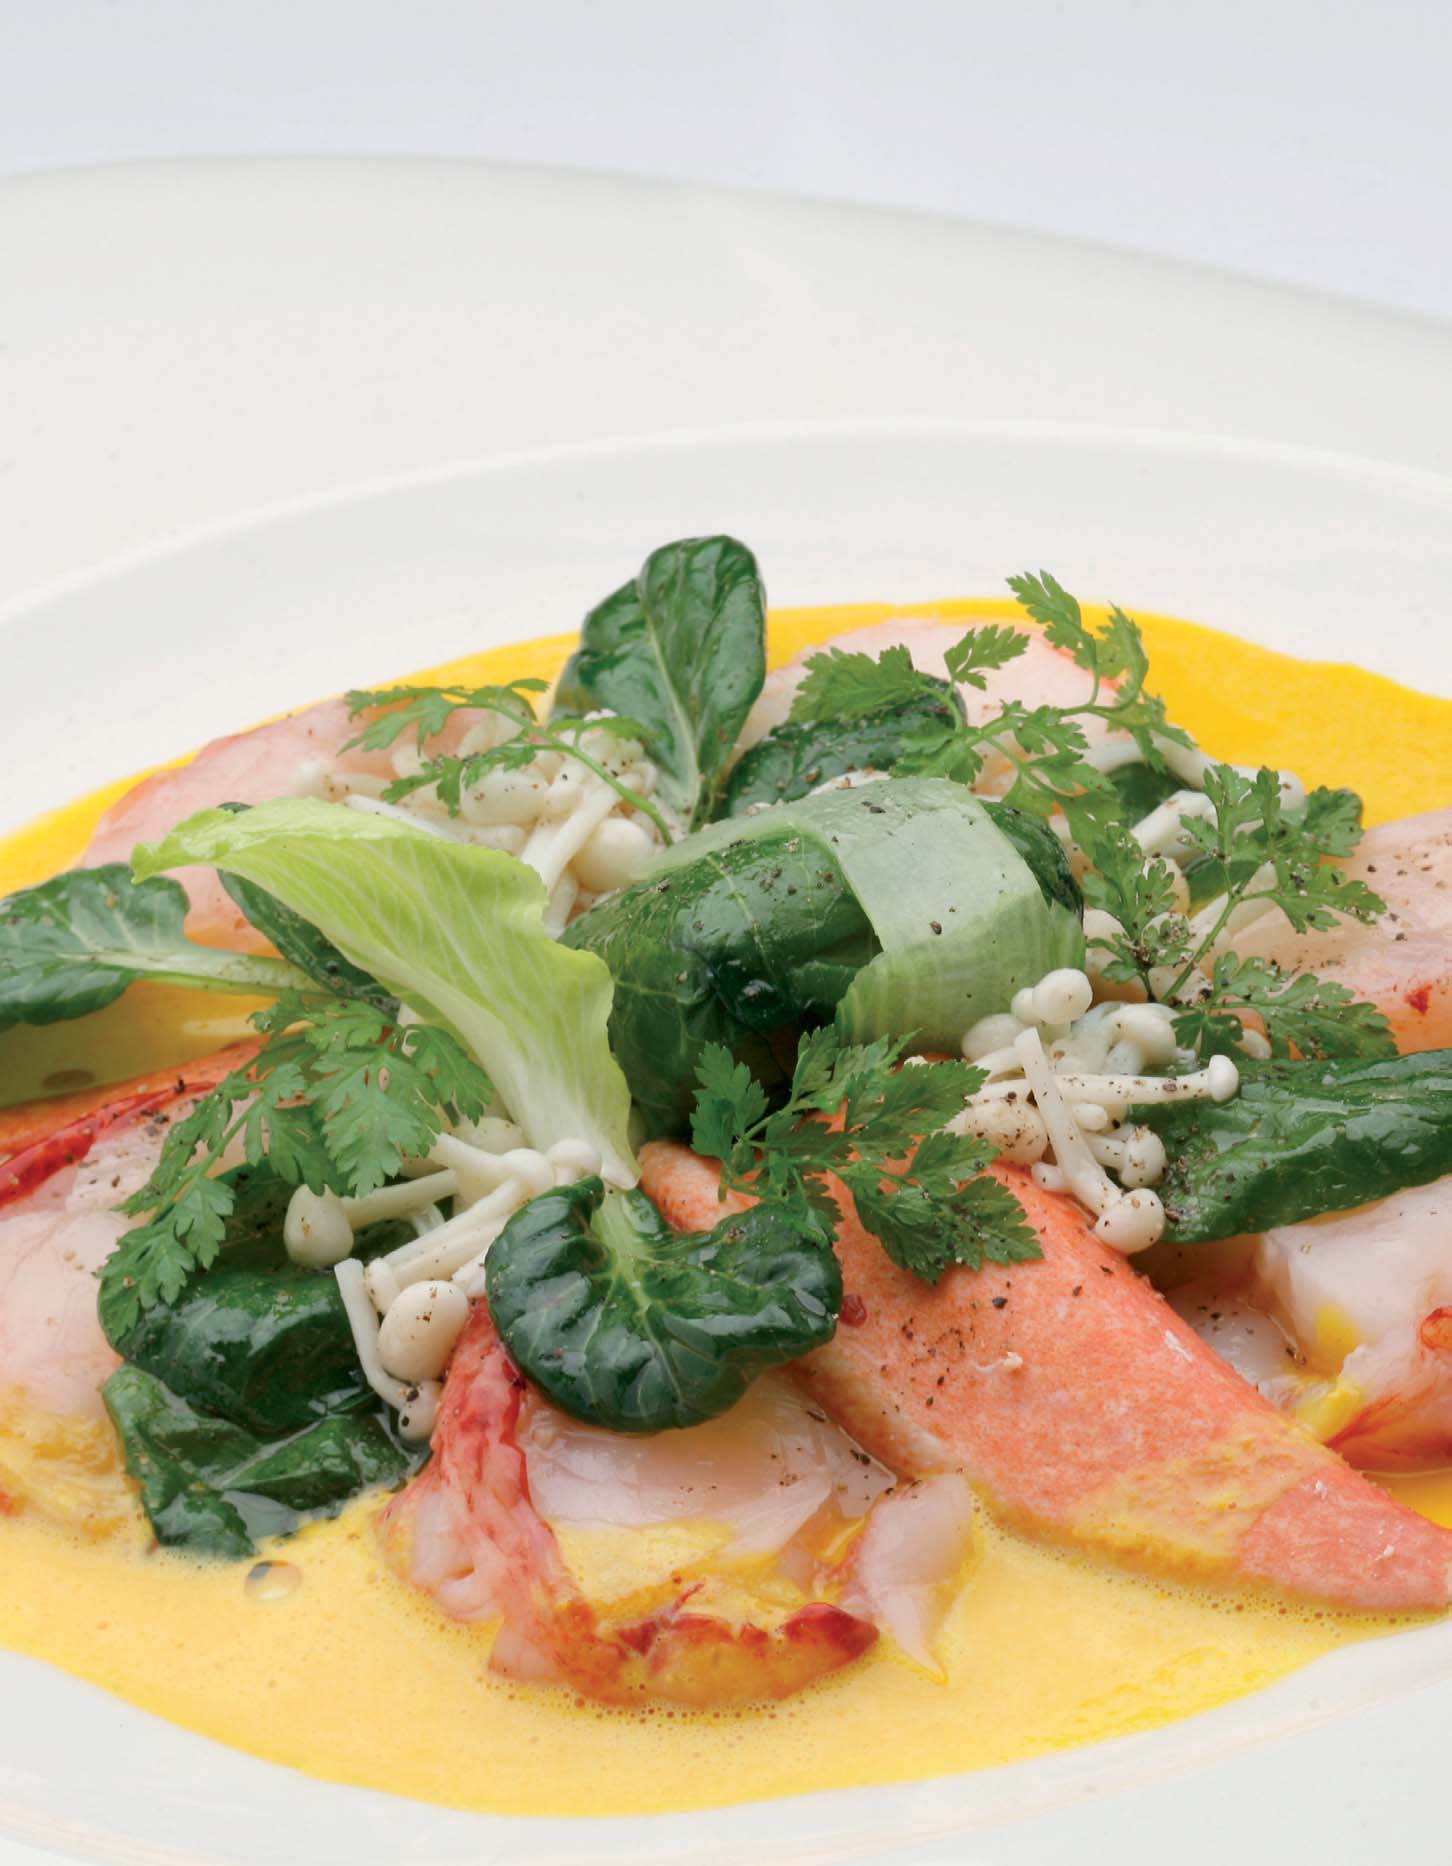 Medallions of Atlantic lobster with Pak Choi, Hierbas de Mallorca and Saffron Stock and Enoki mushrooms - Recipes - Gastronomy - Balearic Islands - Agrifoodstuffs, designations of origin and Balearic gastronomy